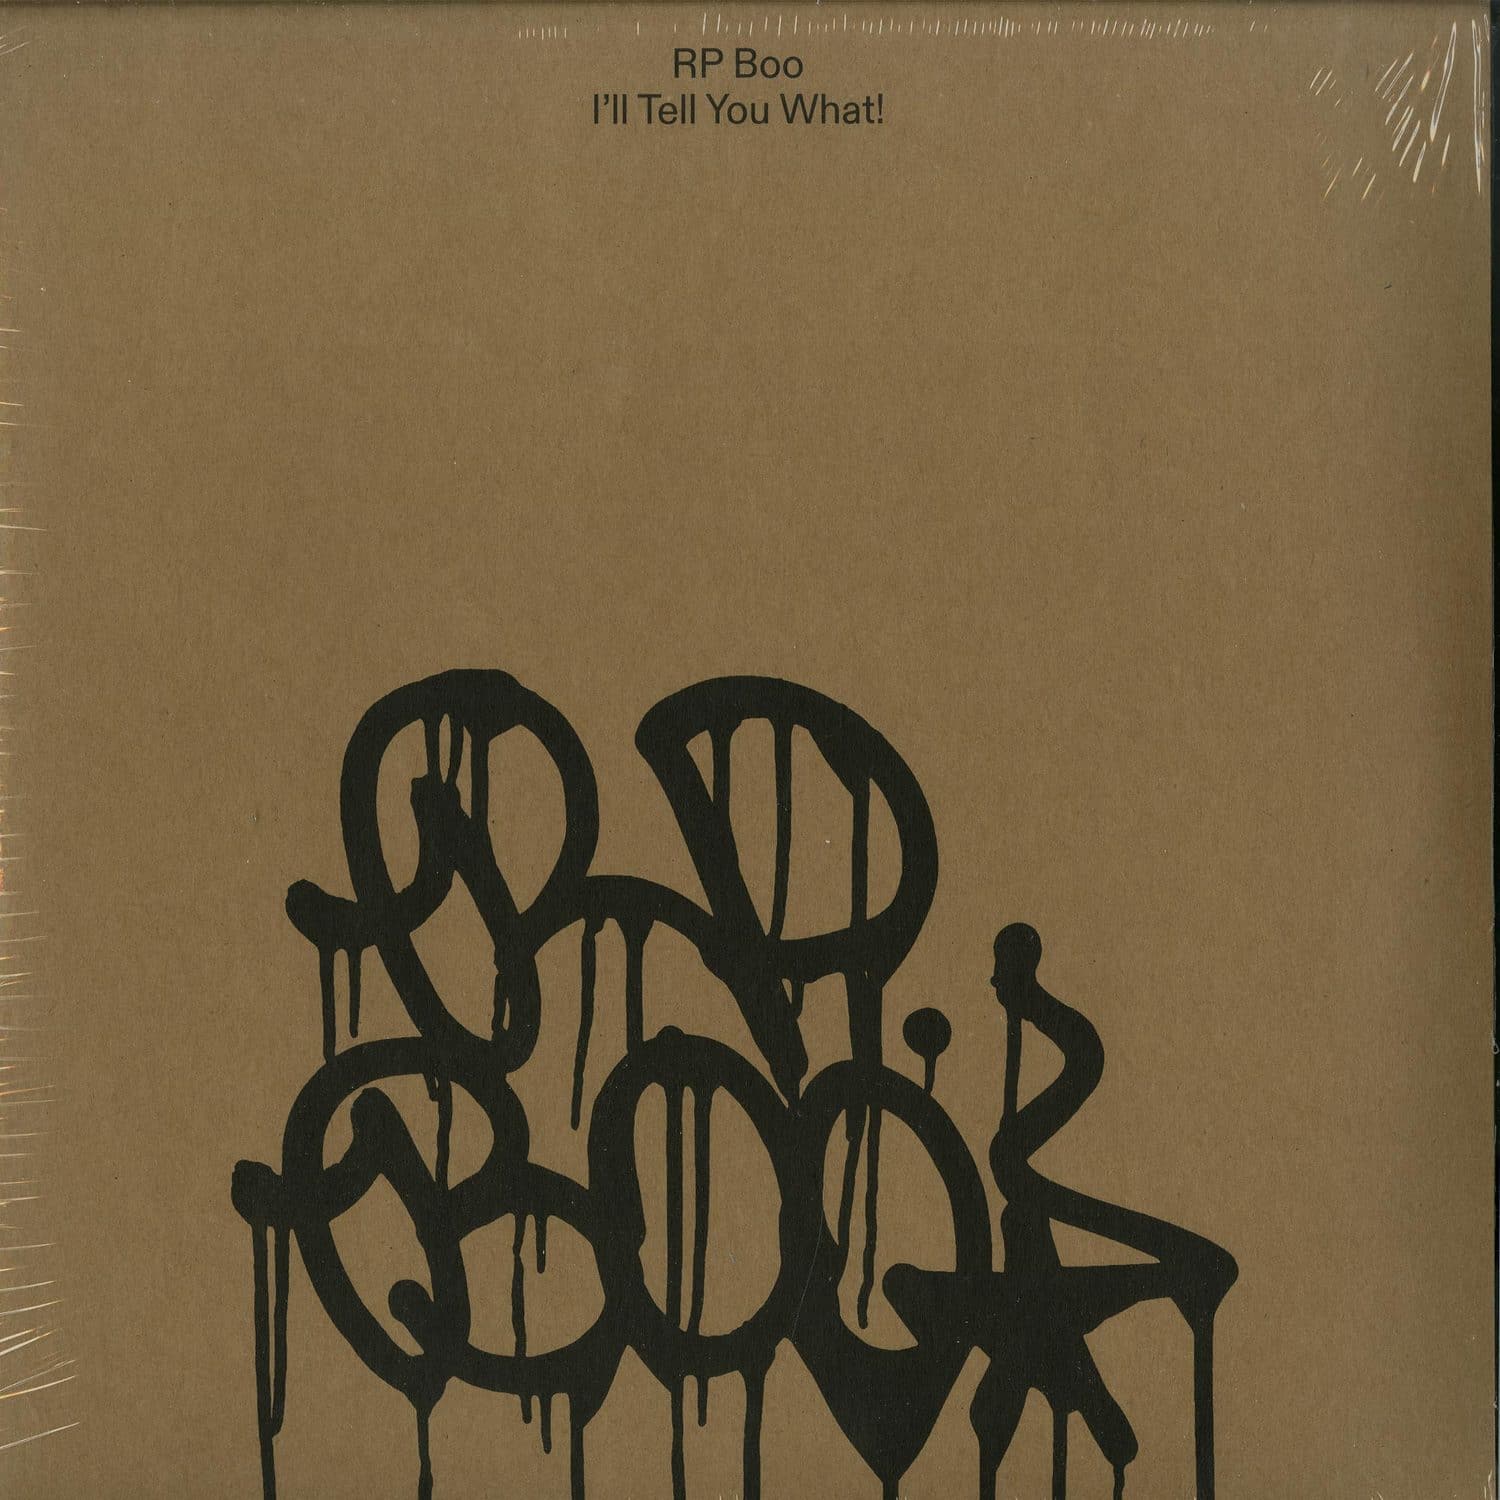 RP Boo - I LL TELL YOU WHAT! 